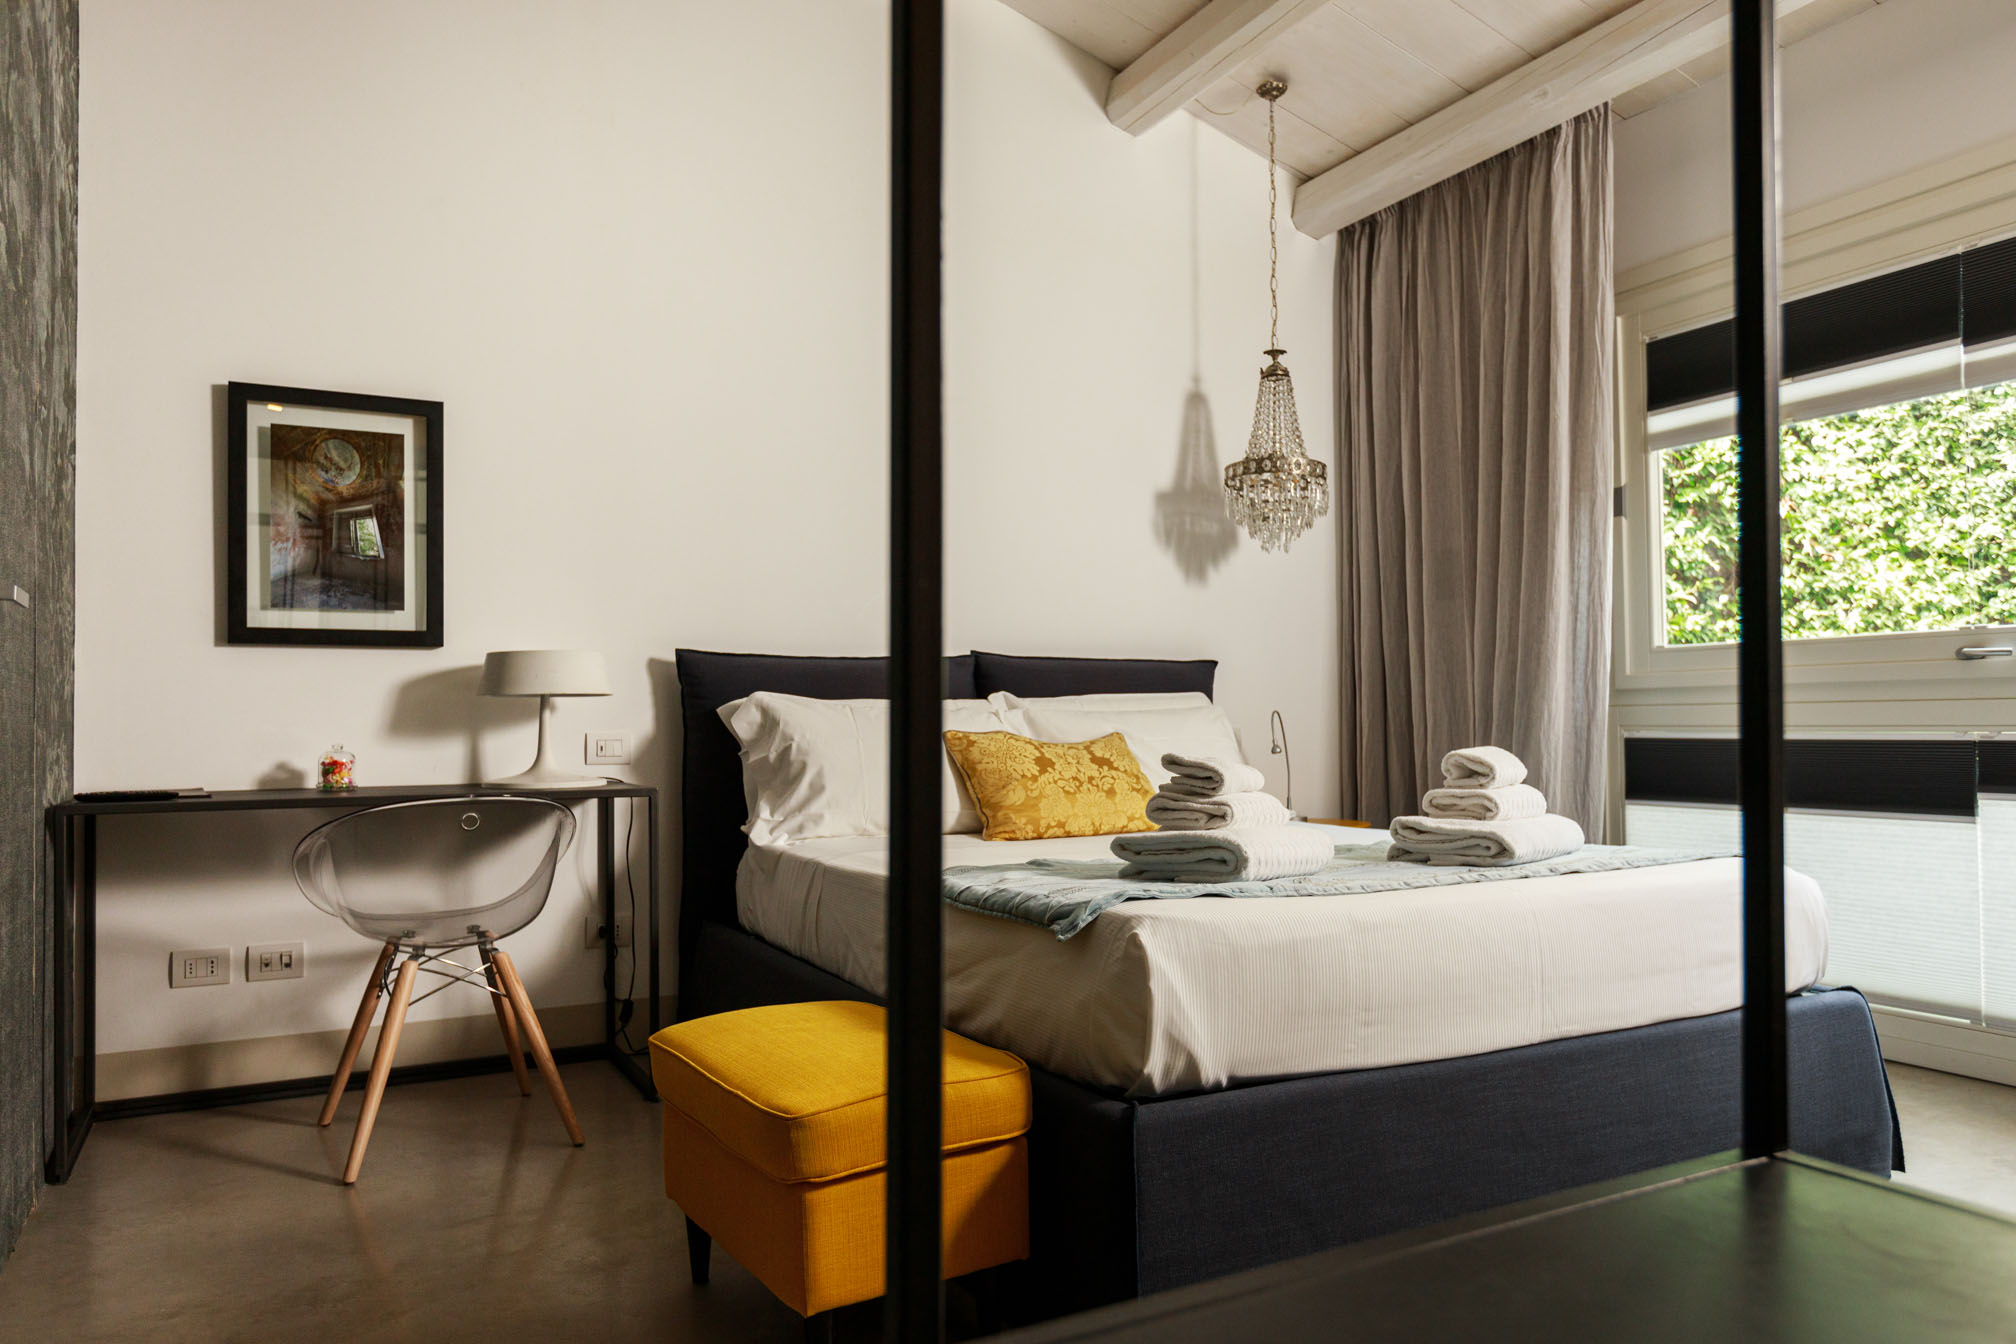 https://www.embracesicilyhospitality.it/guesthouse/le-camere/camera-2/